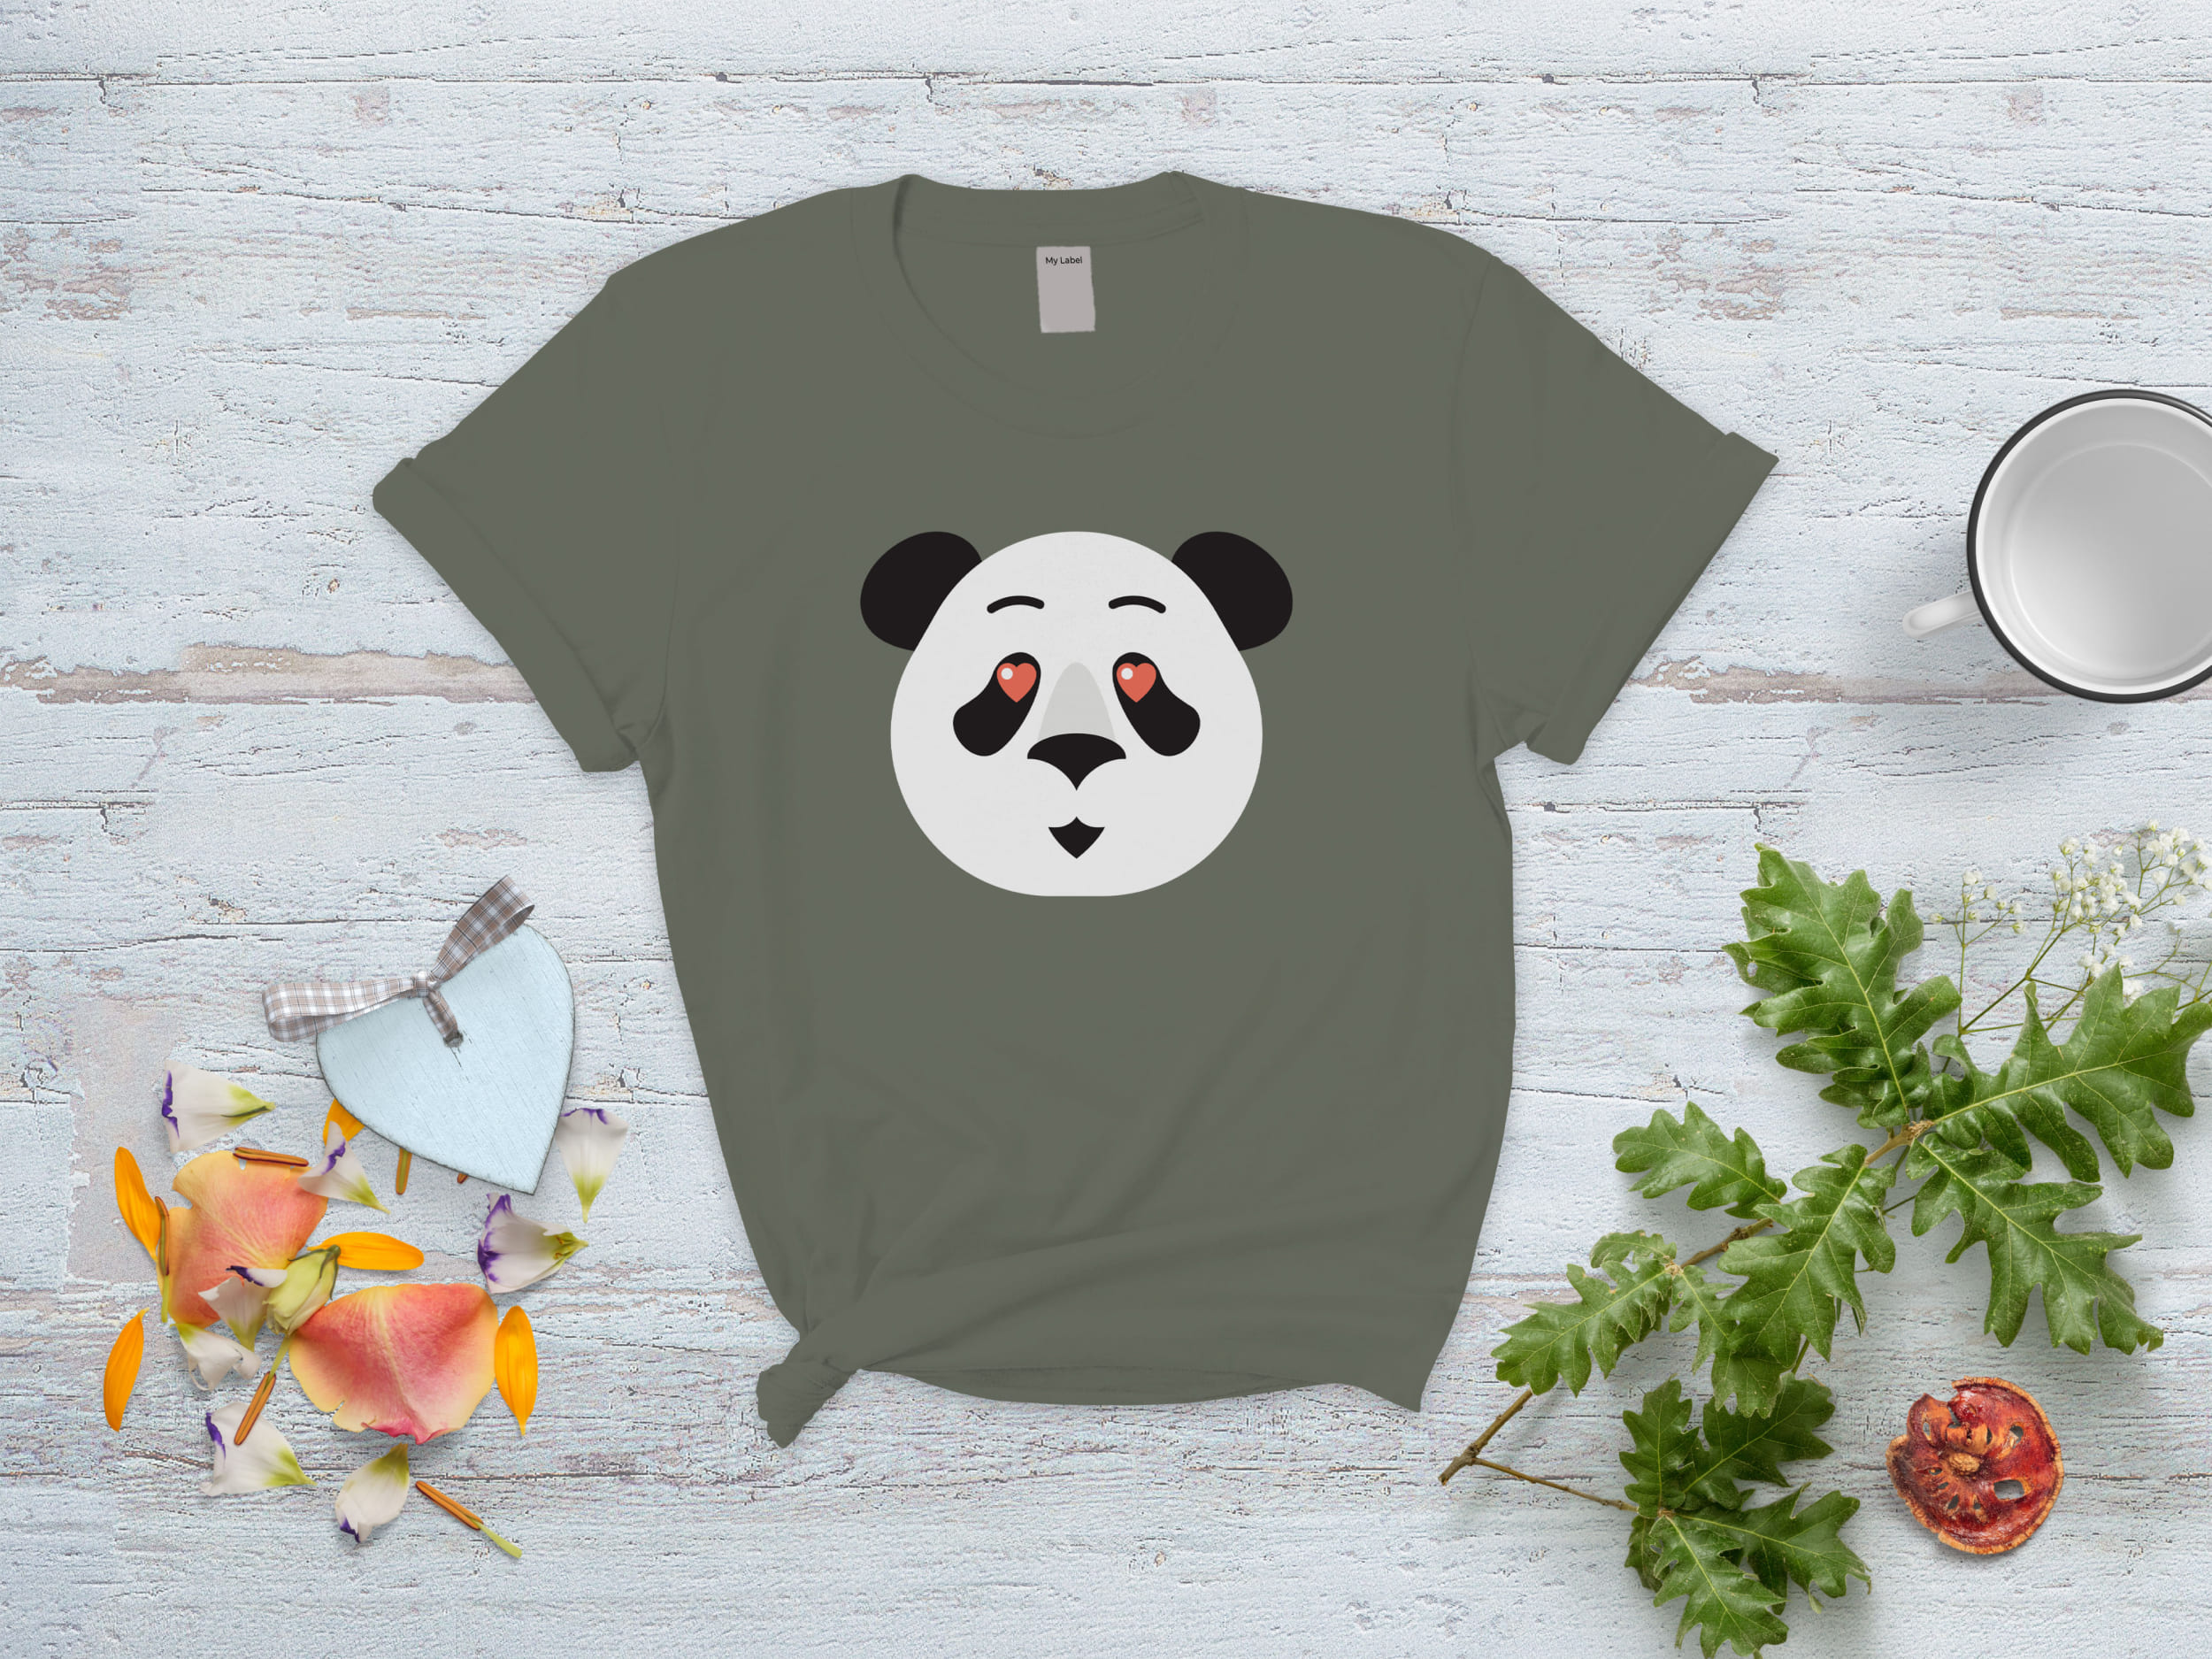 Gray t-shirt with a panda enamored face on a gray and white background with various objects.